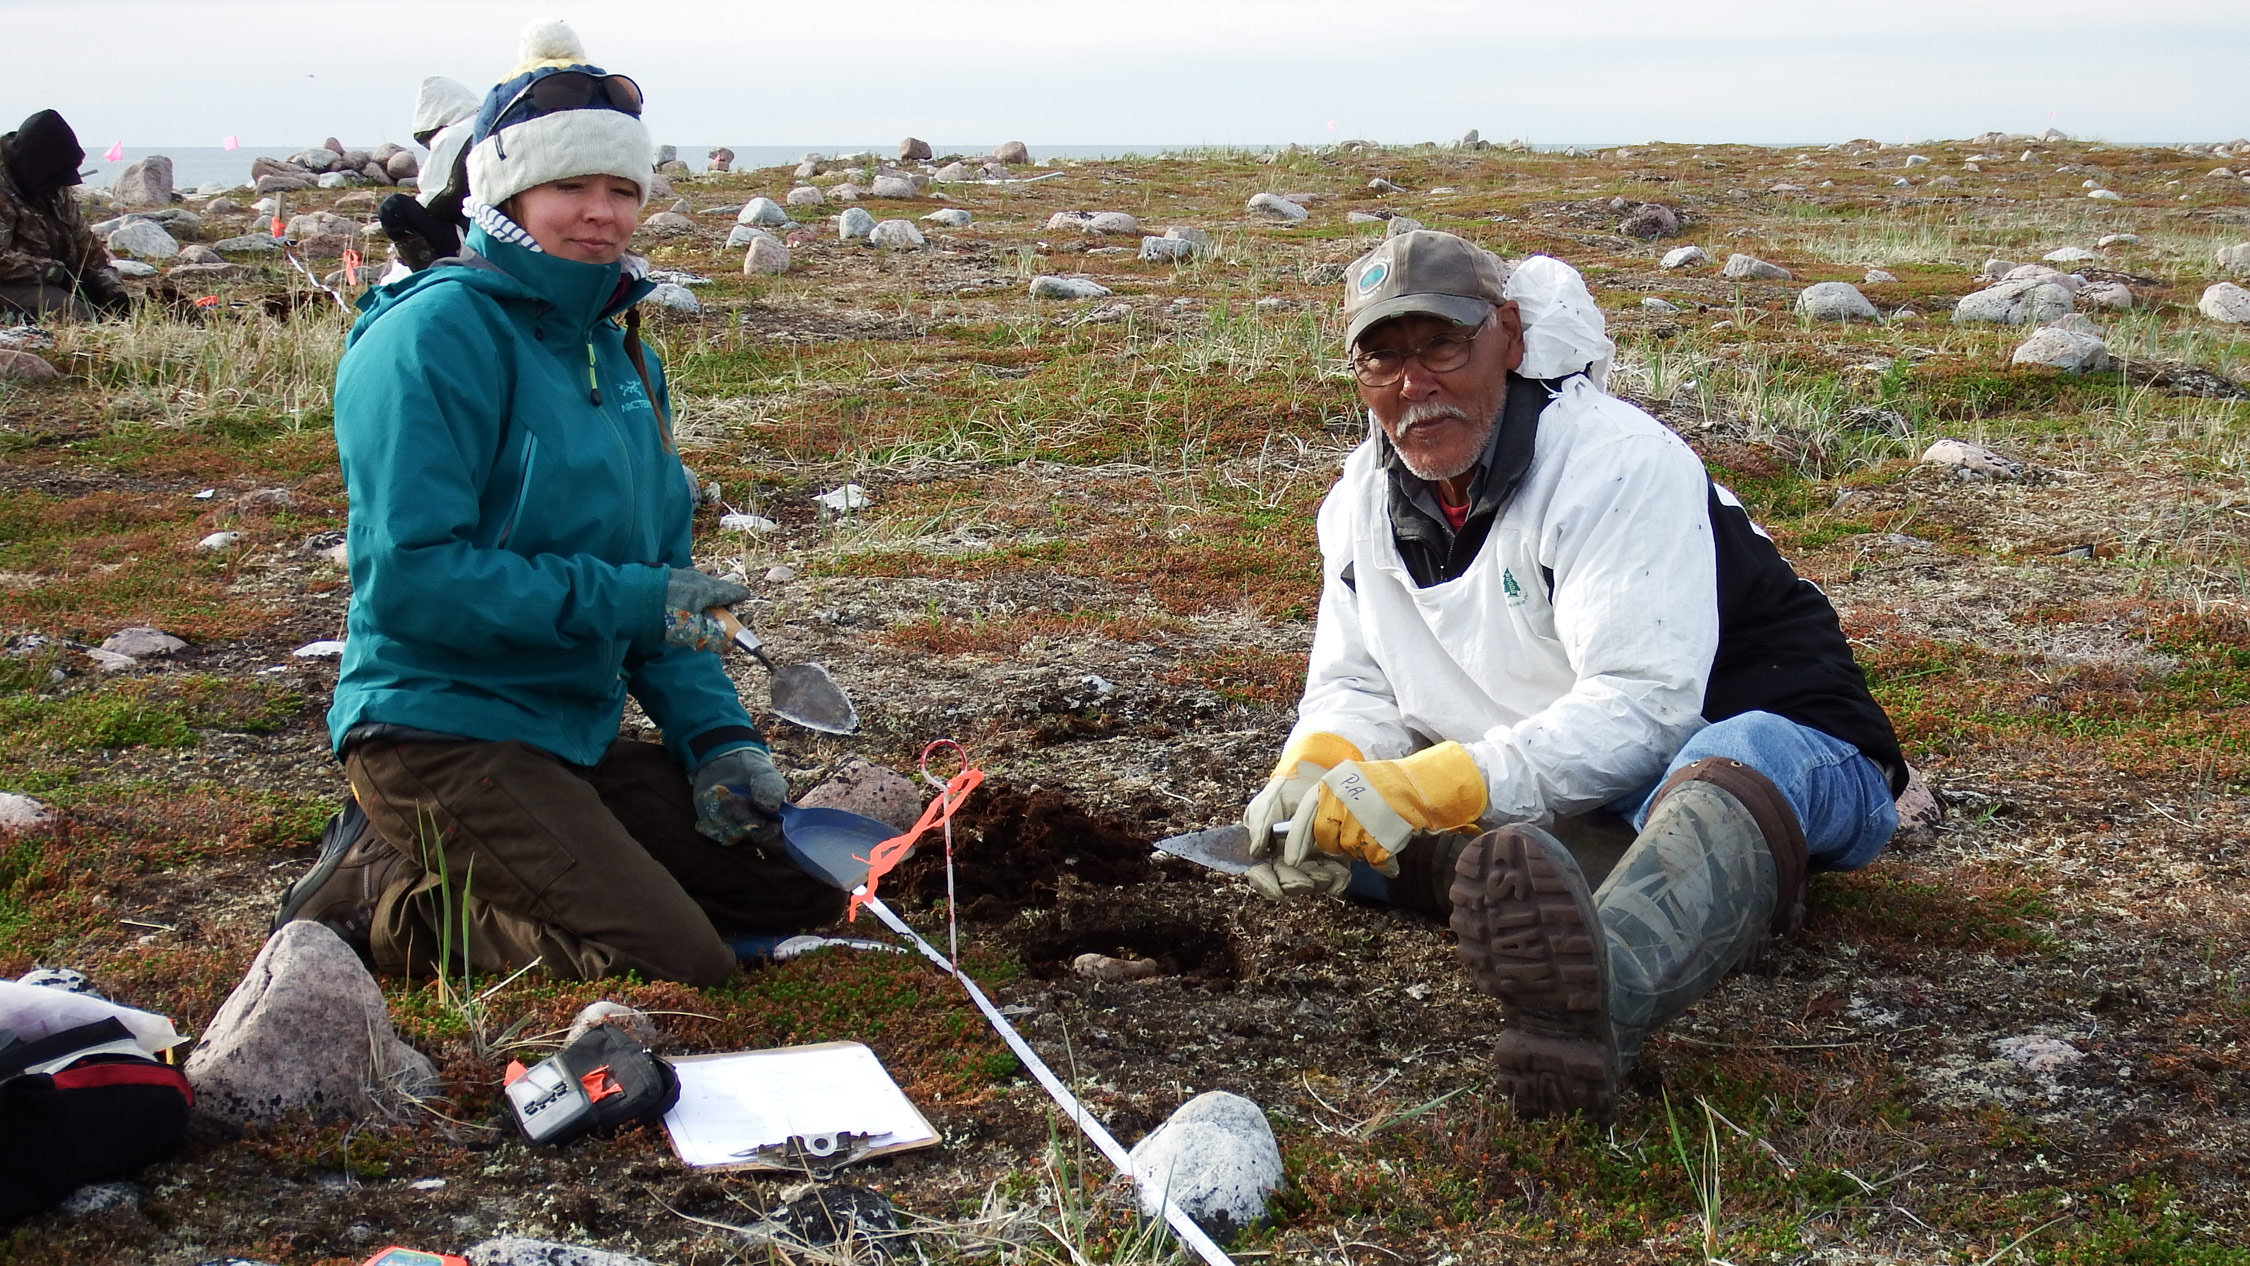 Kristin Westdal, a marine biologist with Oceans North Canada, conducts a shovel test with Peter Alareak of Arviat, Nunavut.